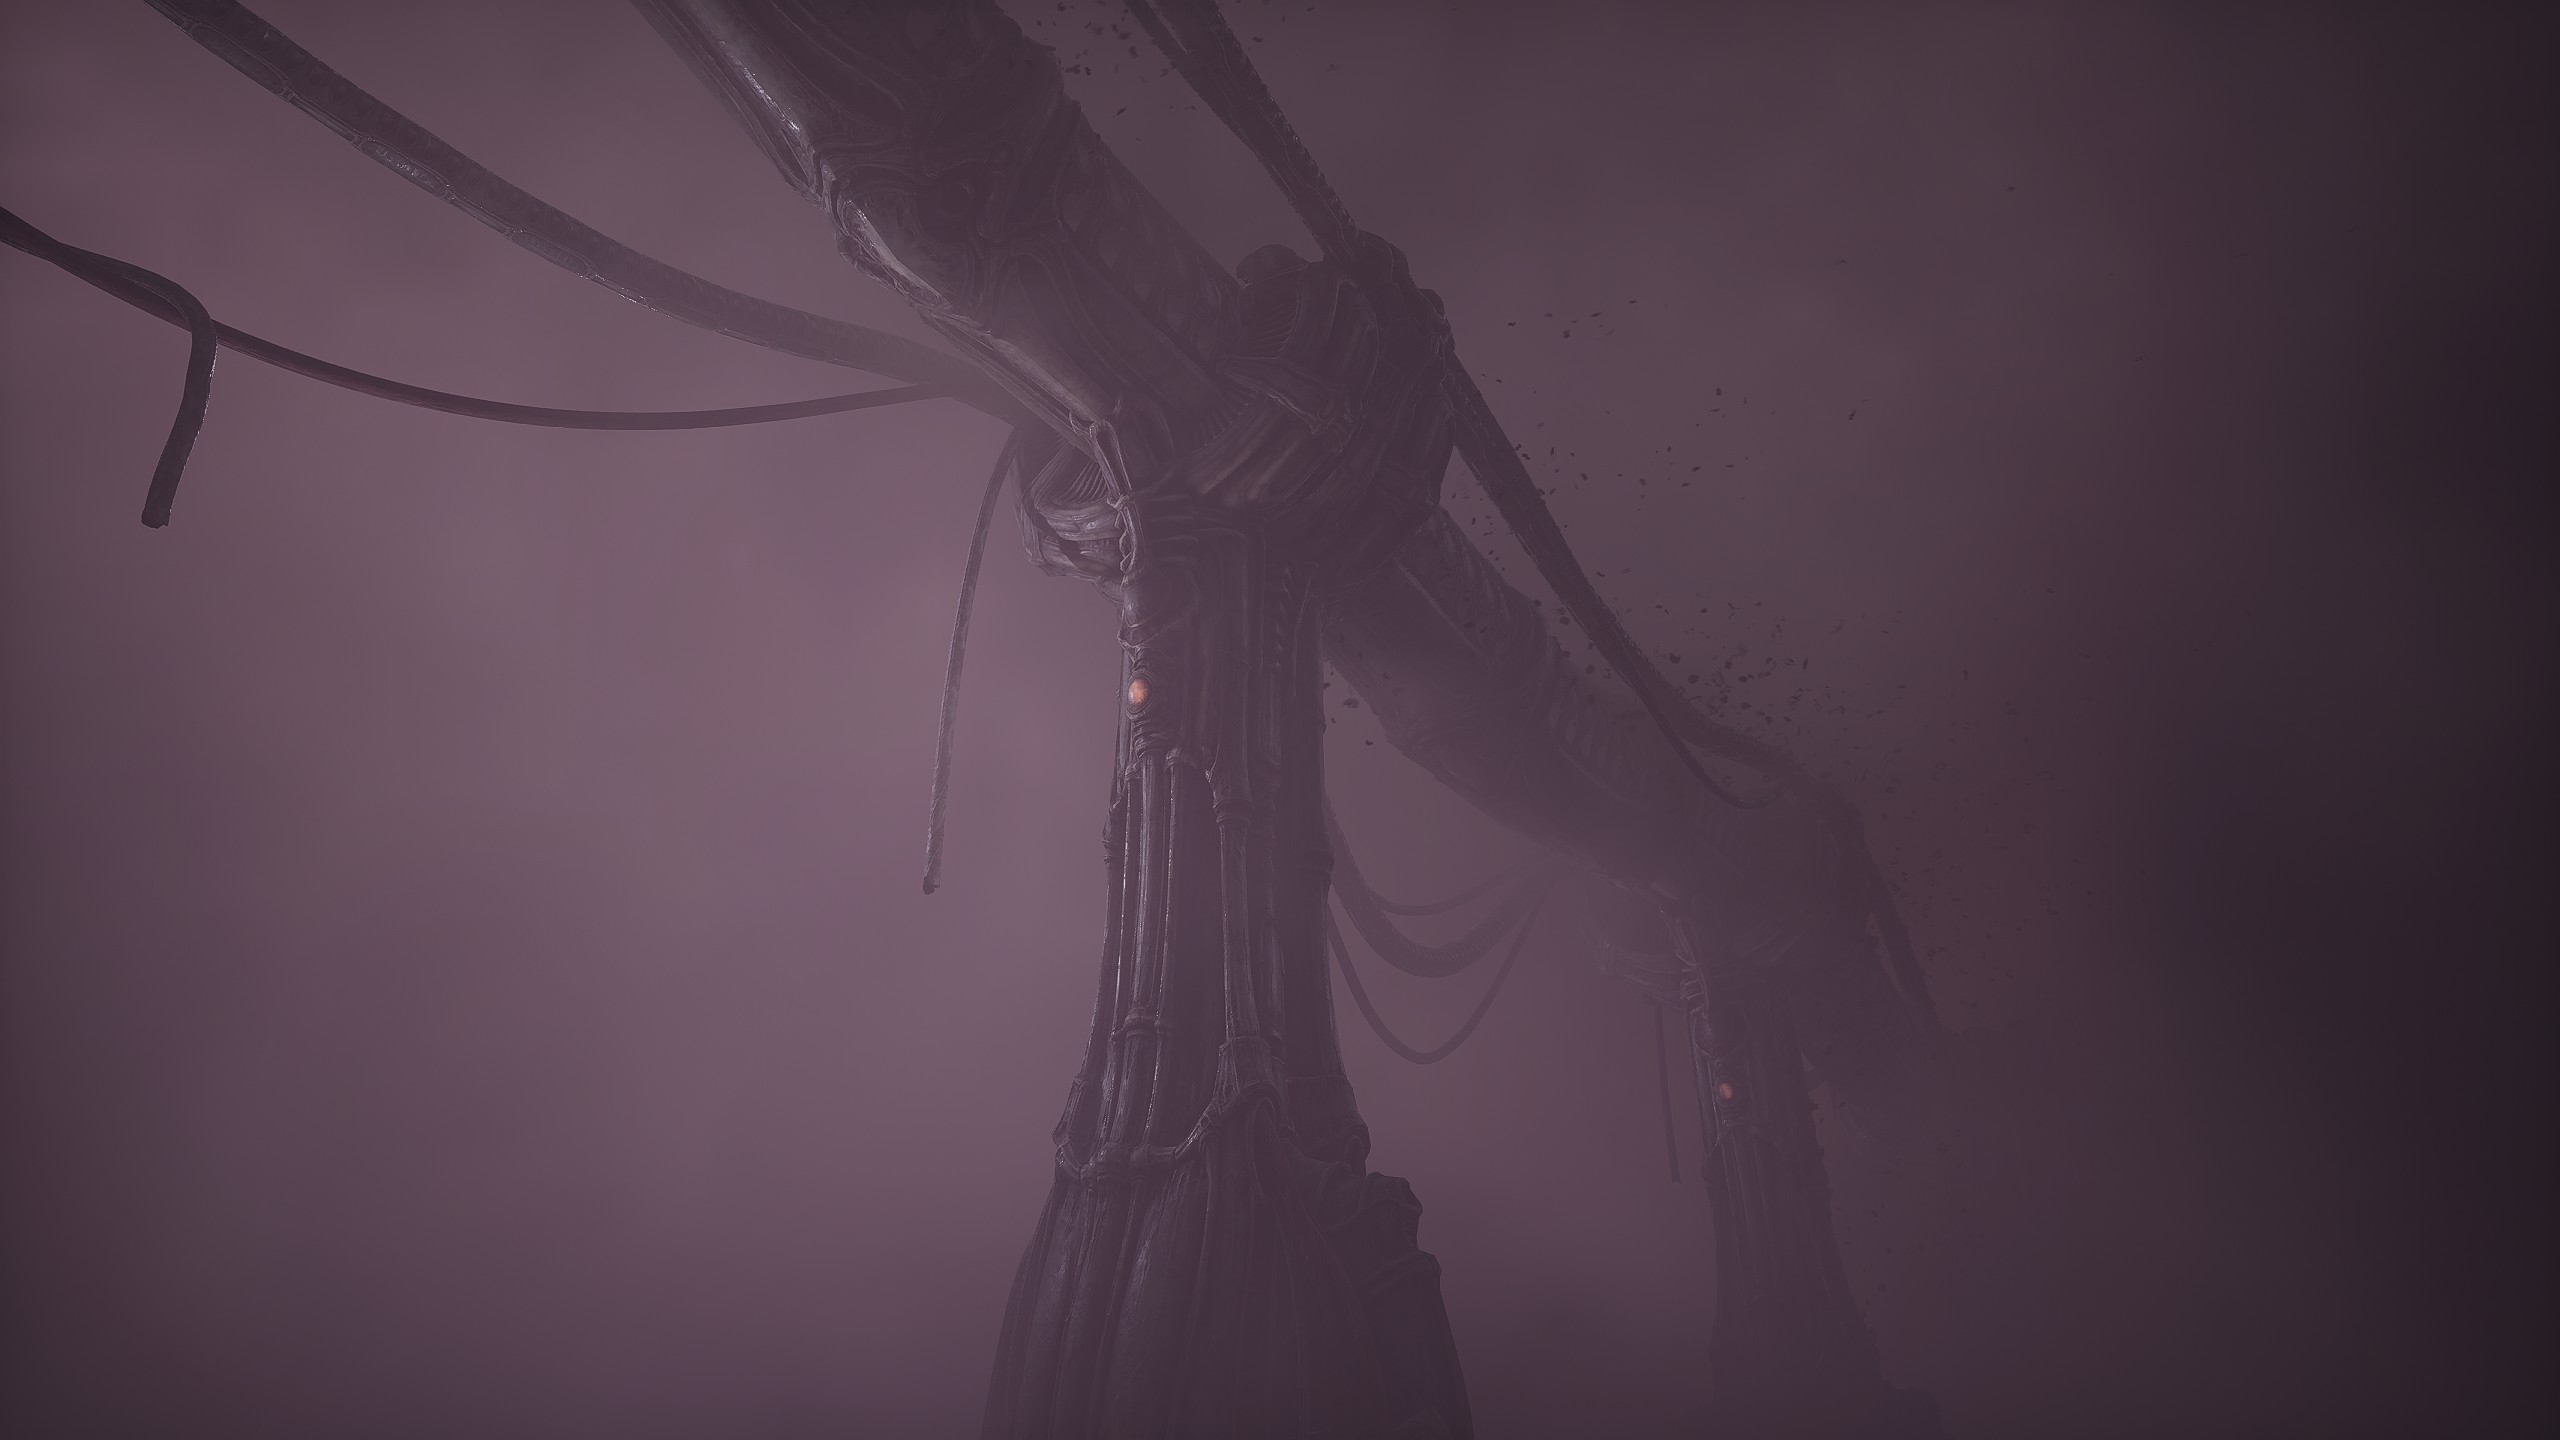 insectoid pillars holding up some kind of suspension bridge barely visible through a lilac haze